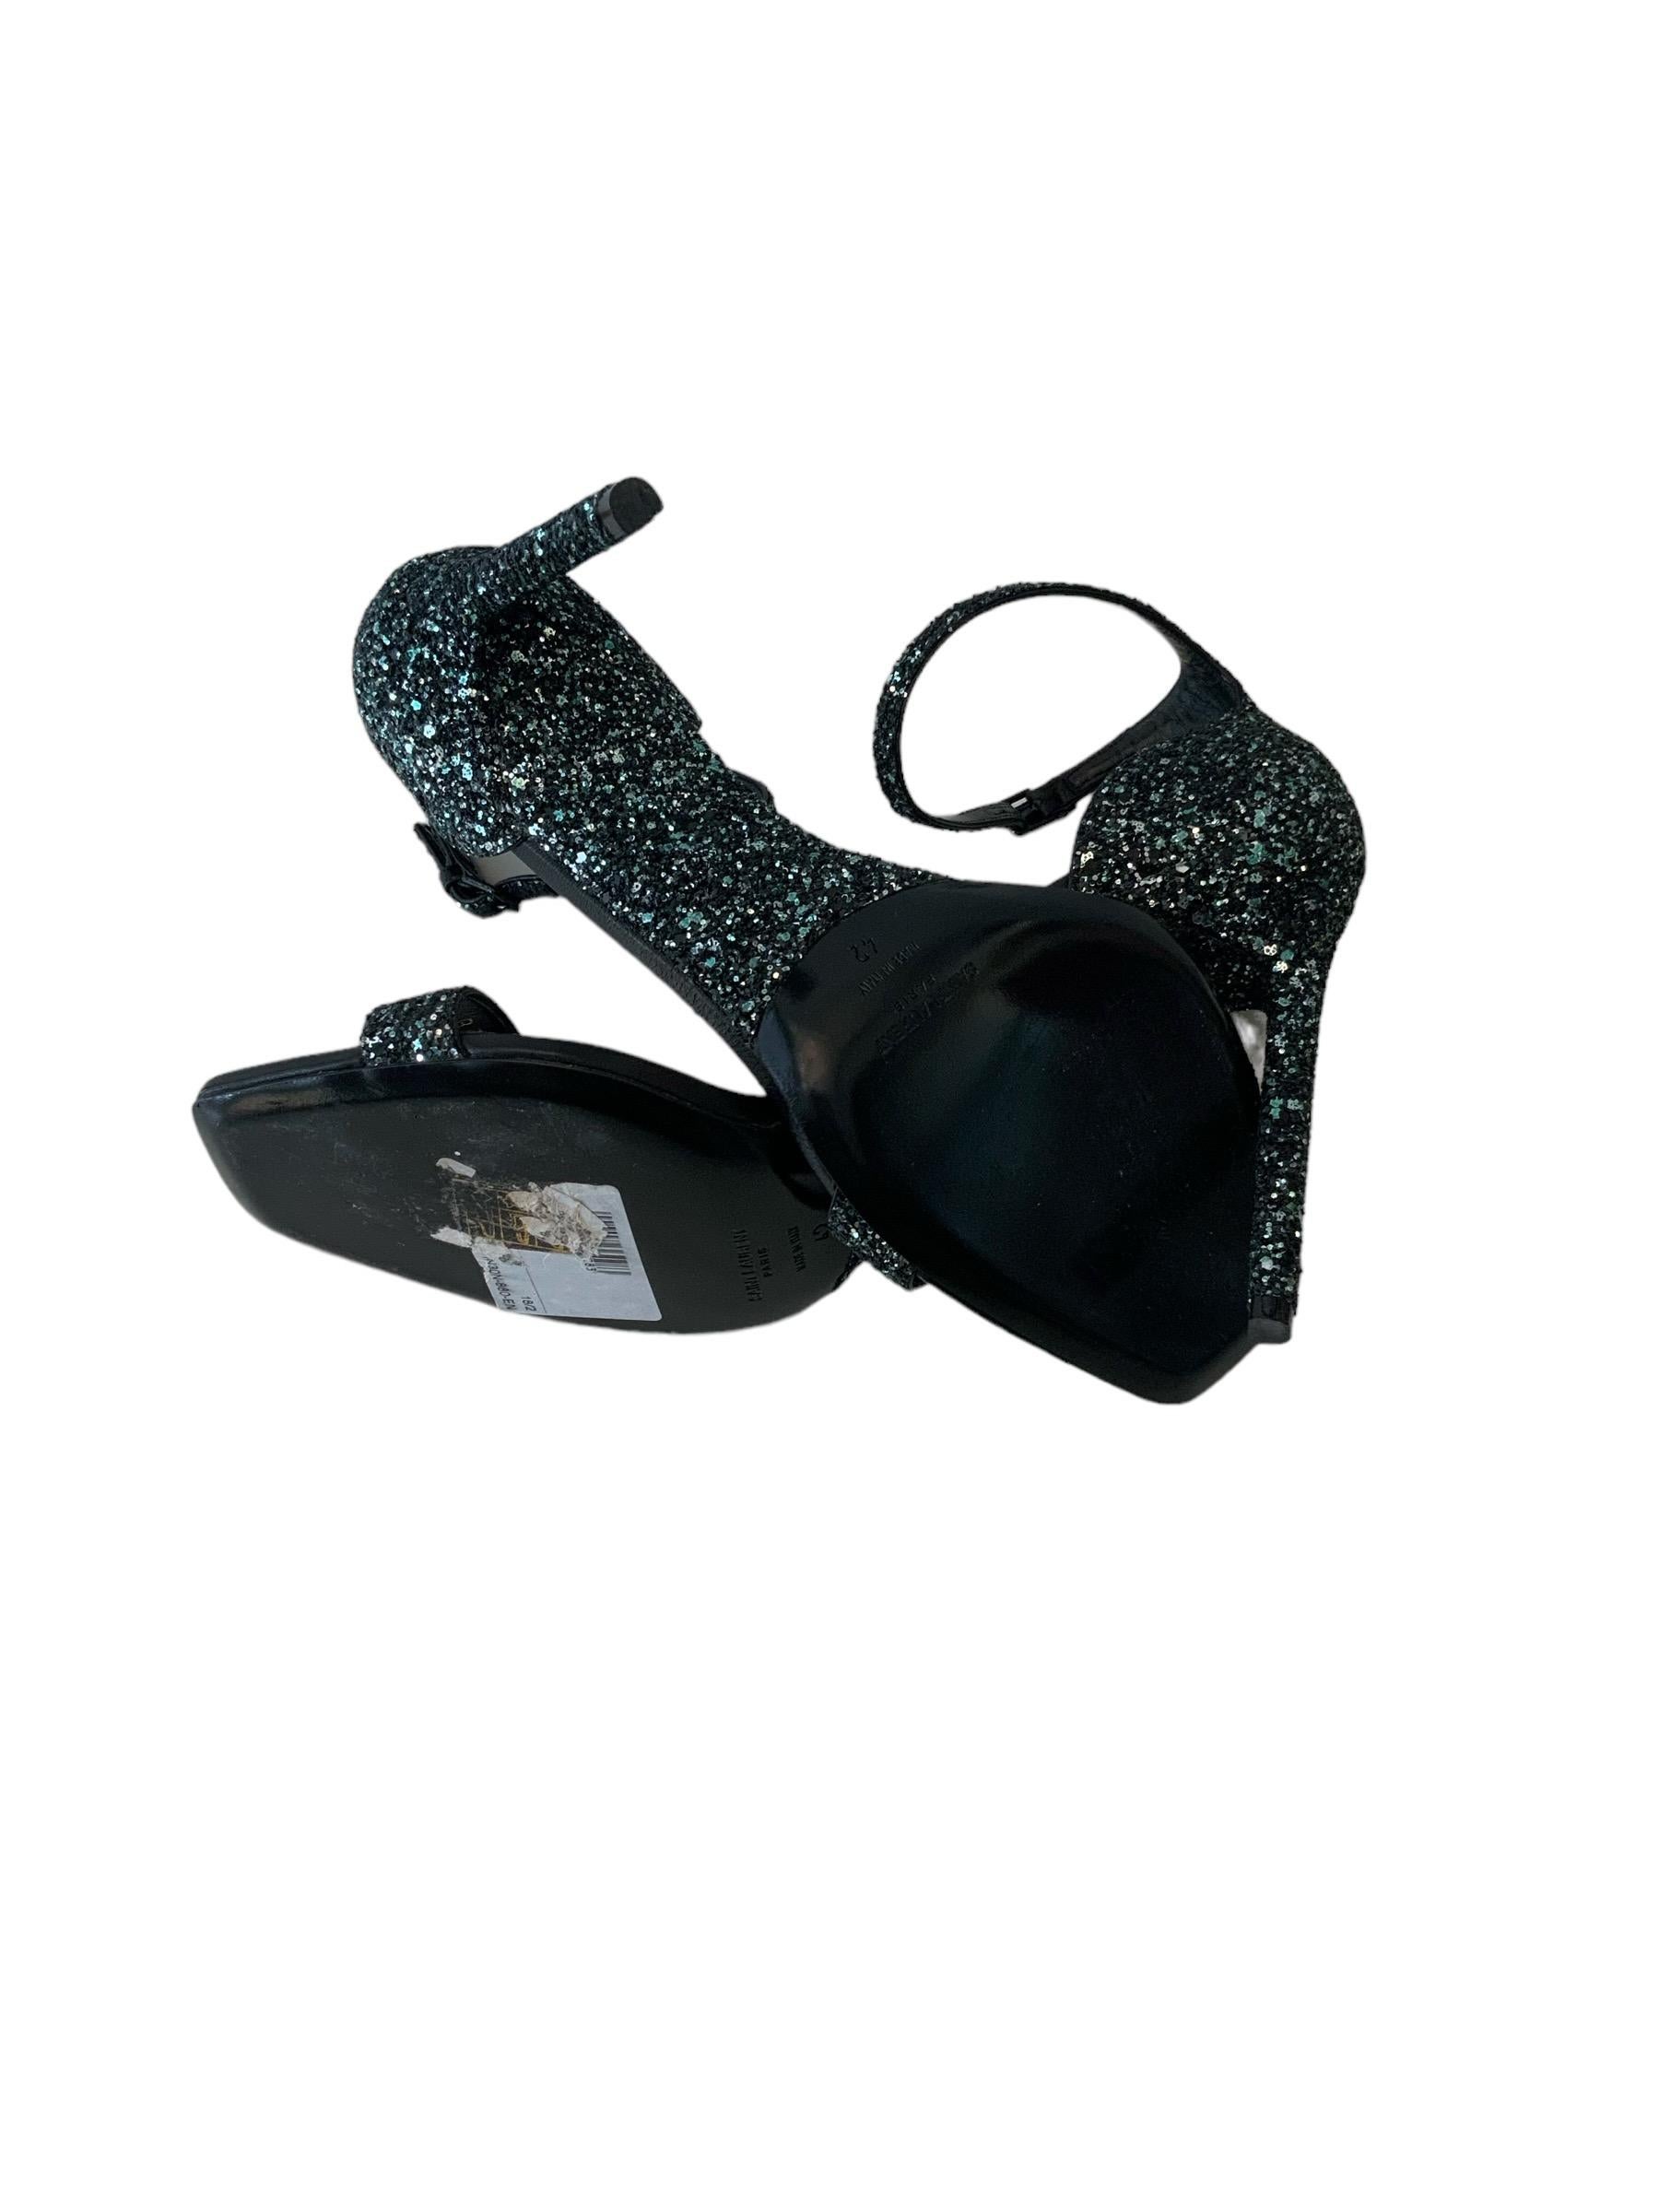 Saint Laurent Amber 105 Glitter Strap Sandals In Excellent Condition For Sale In Geneva, CH